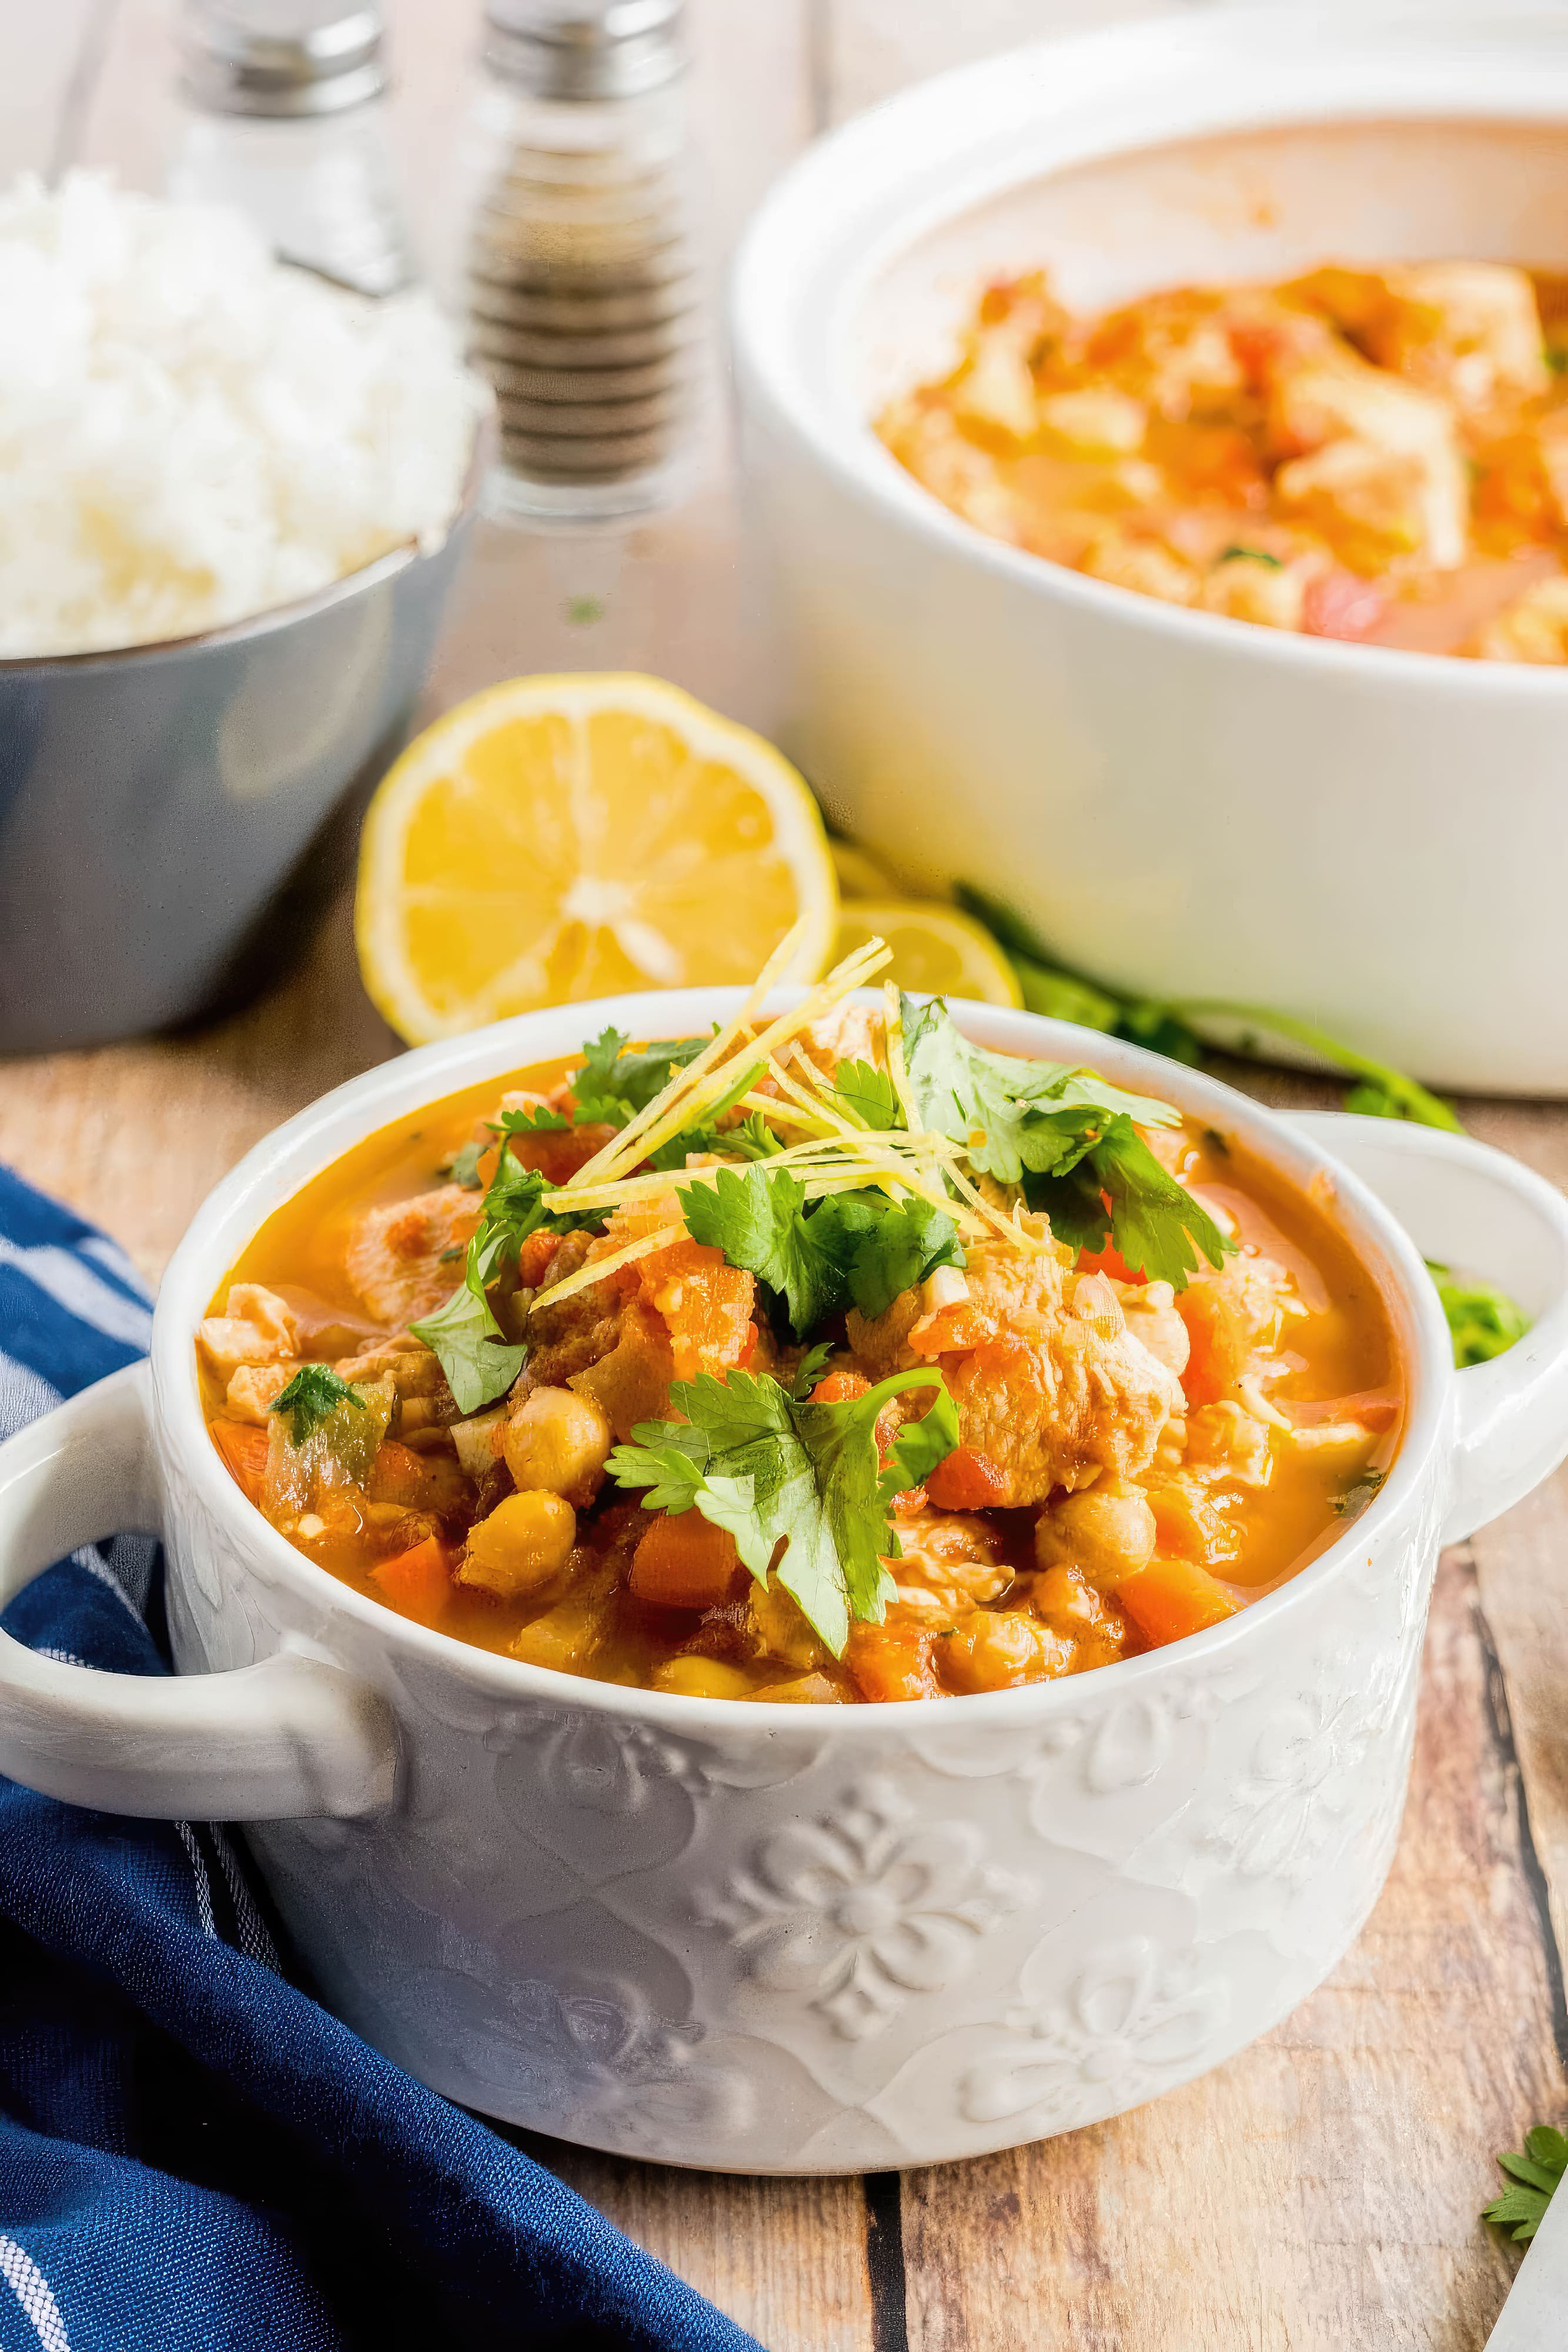 Image of moroccan chicken stew